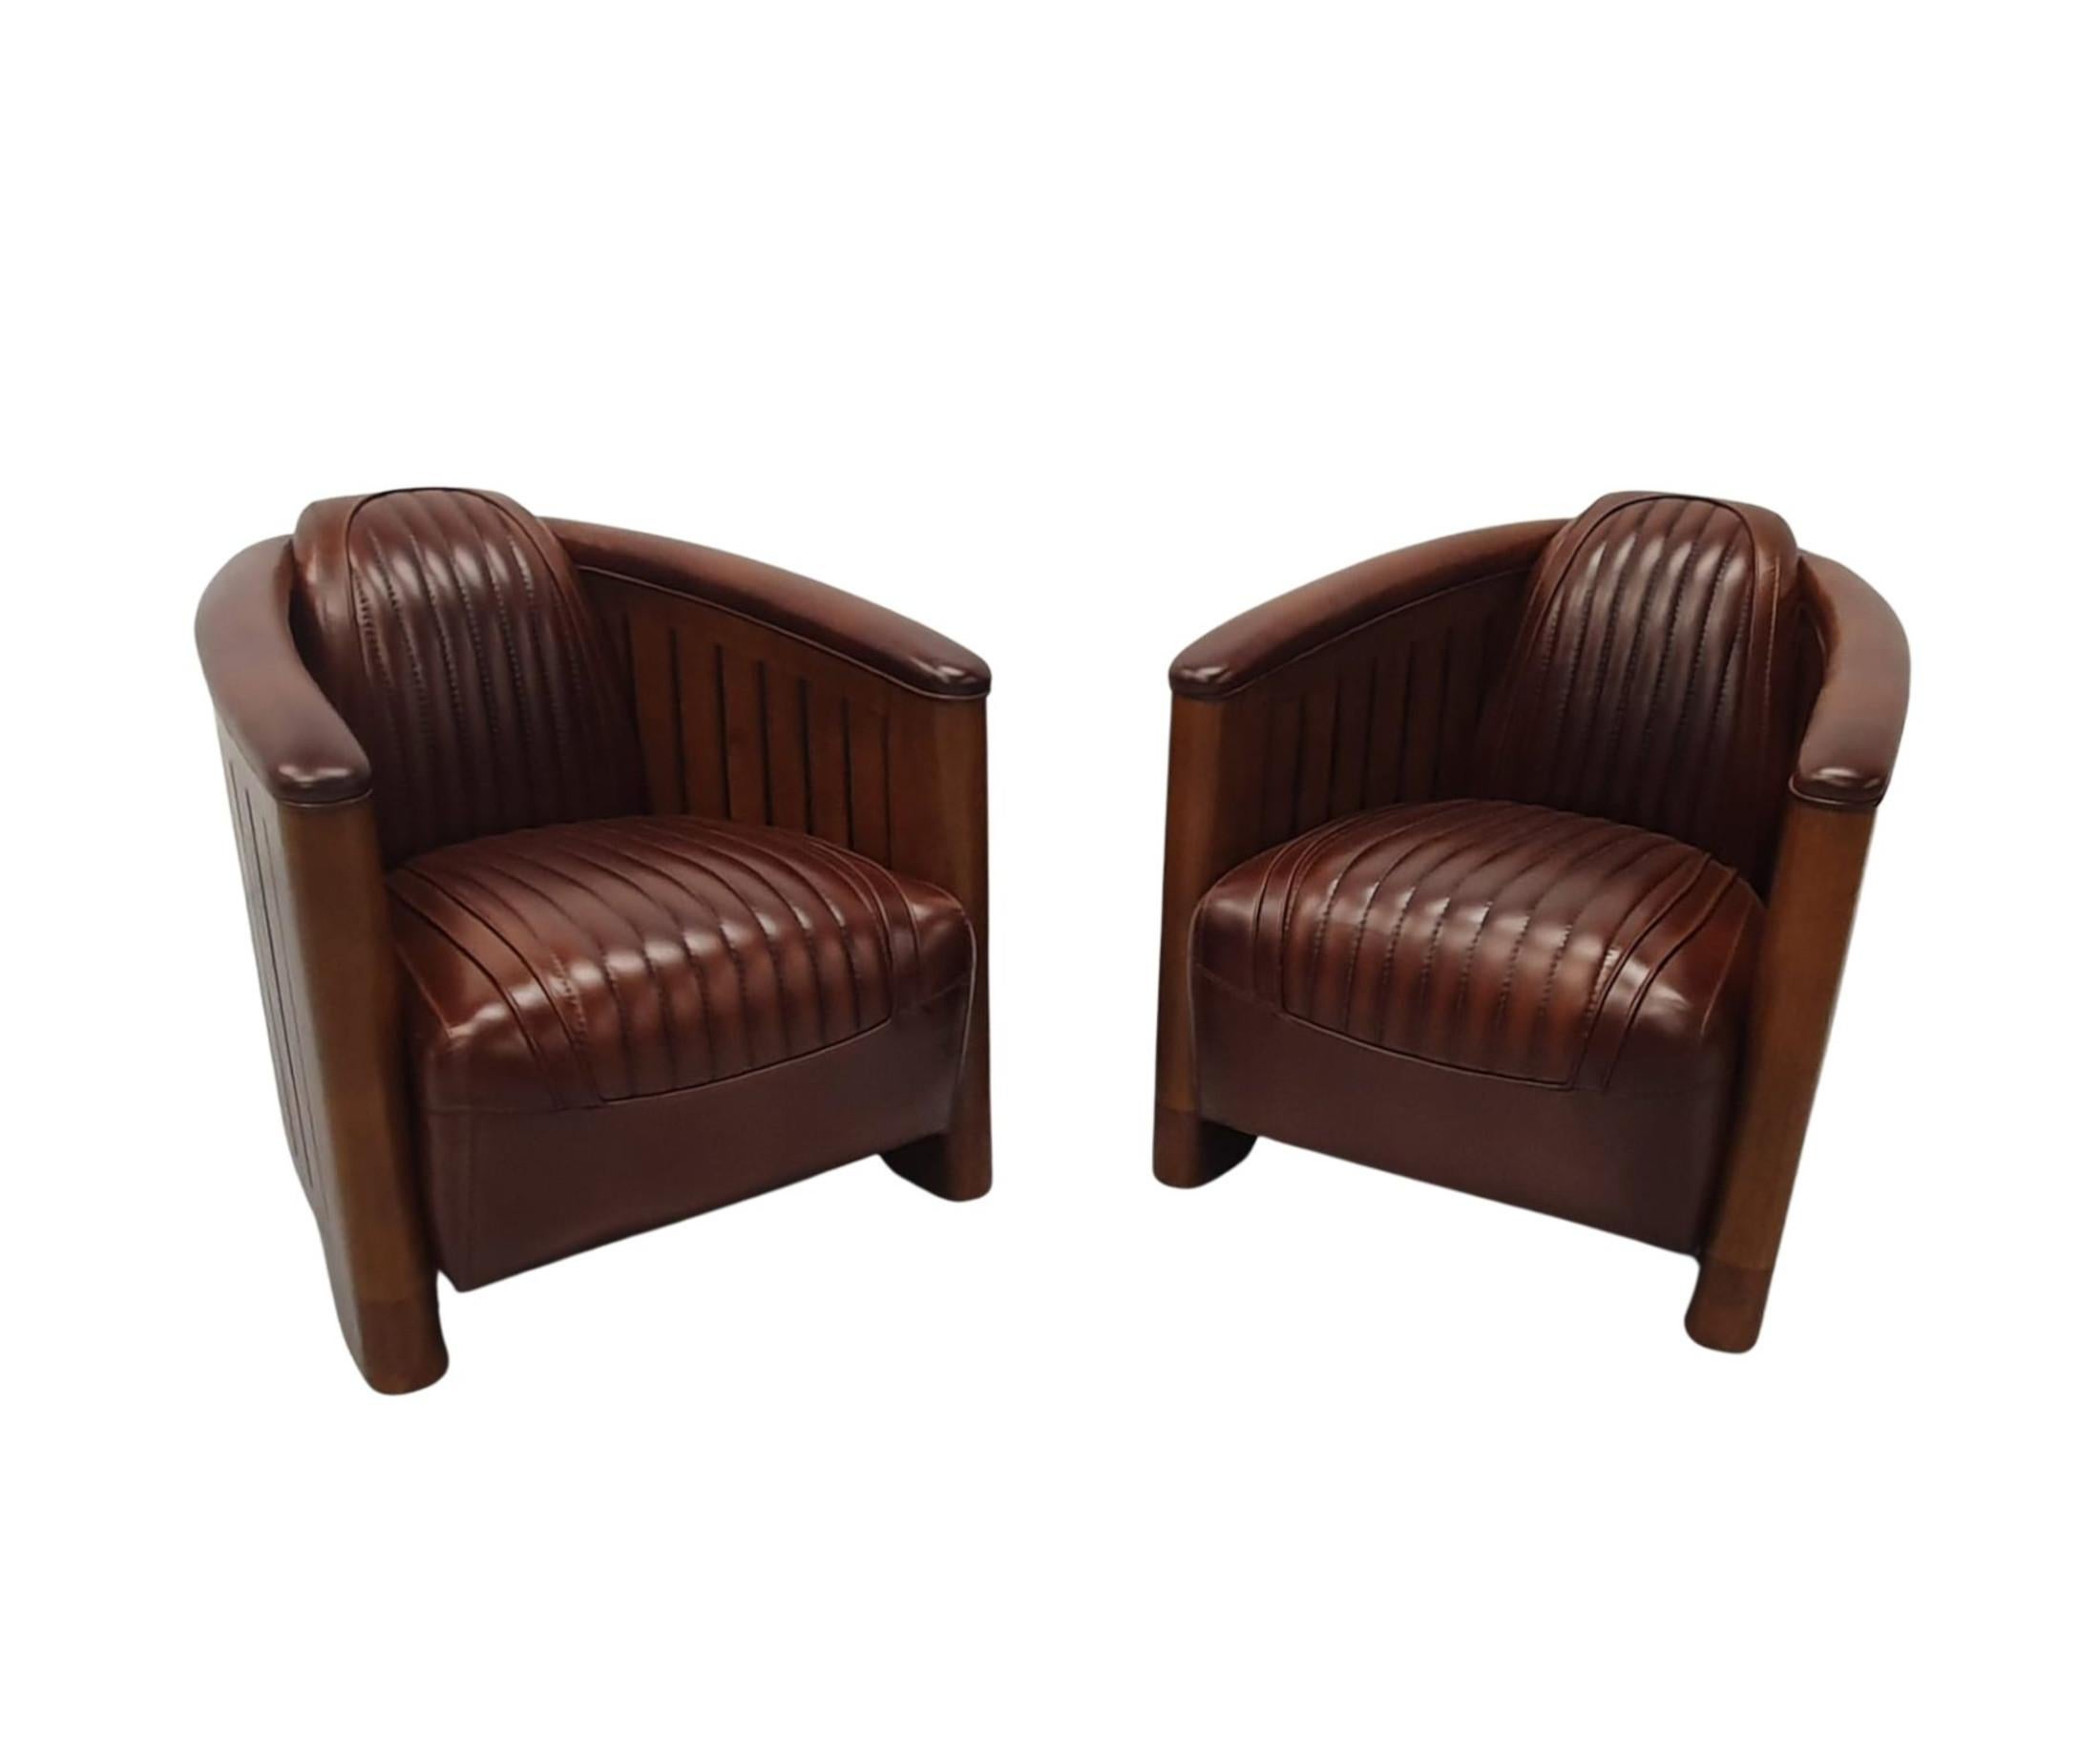 A stunning handmade leather and cherrywood framed club armchair in the Art Deco style, of fabulous quality and with gorgeously rich patination and grain.  Beautifully upholstered in elegant brown leather with innovative horizontal pipe stitch